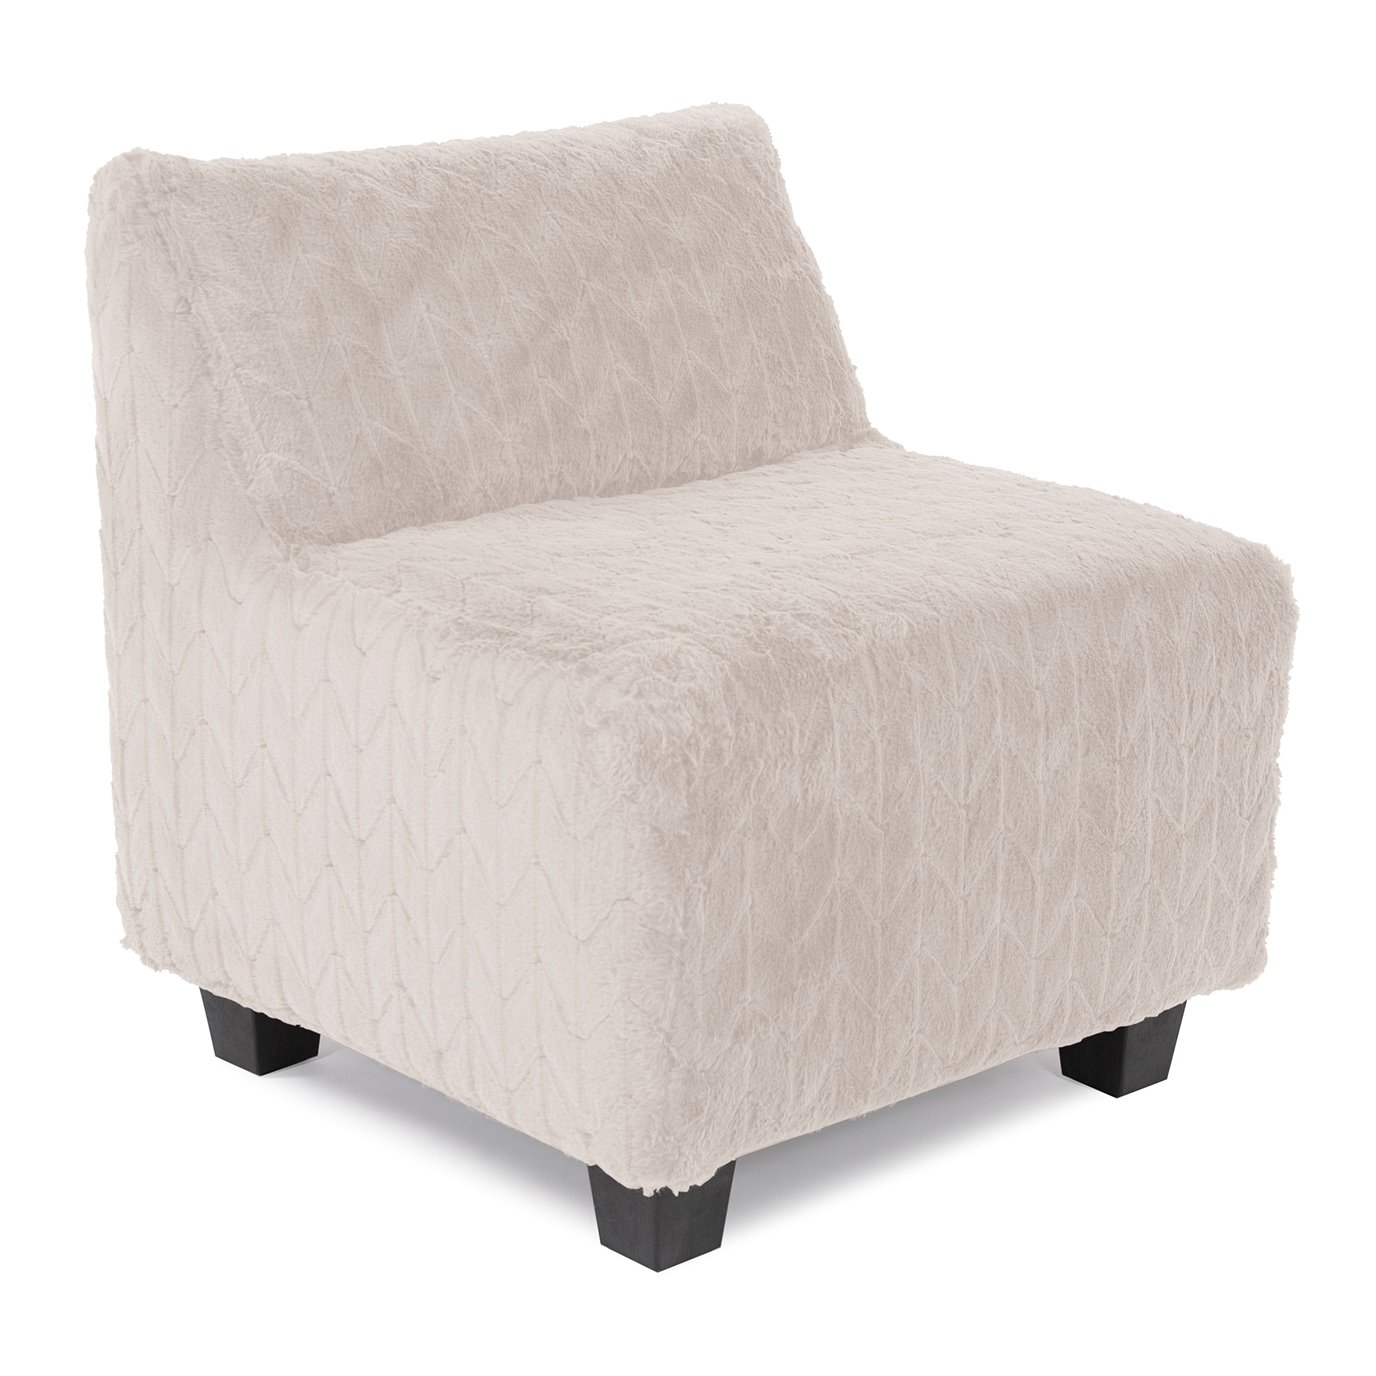 Howard Elliott Pod Chair Cover Faux Fur Angora Natural - Cover Only, Chair Base Not Included